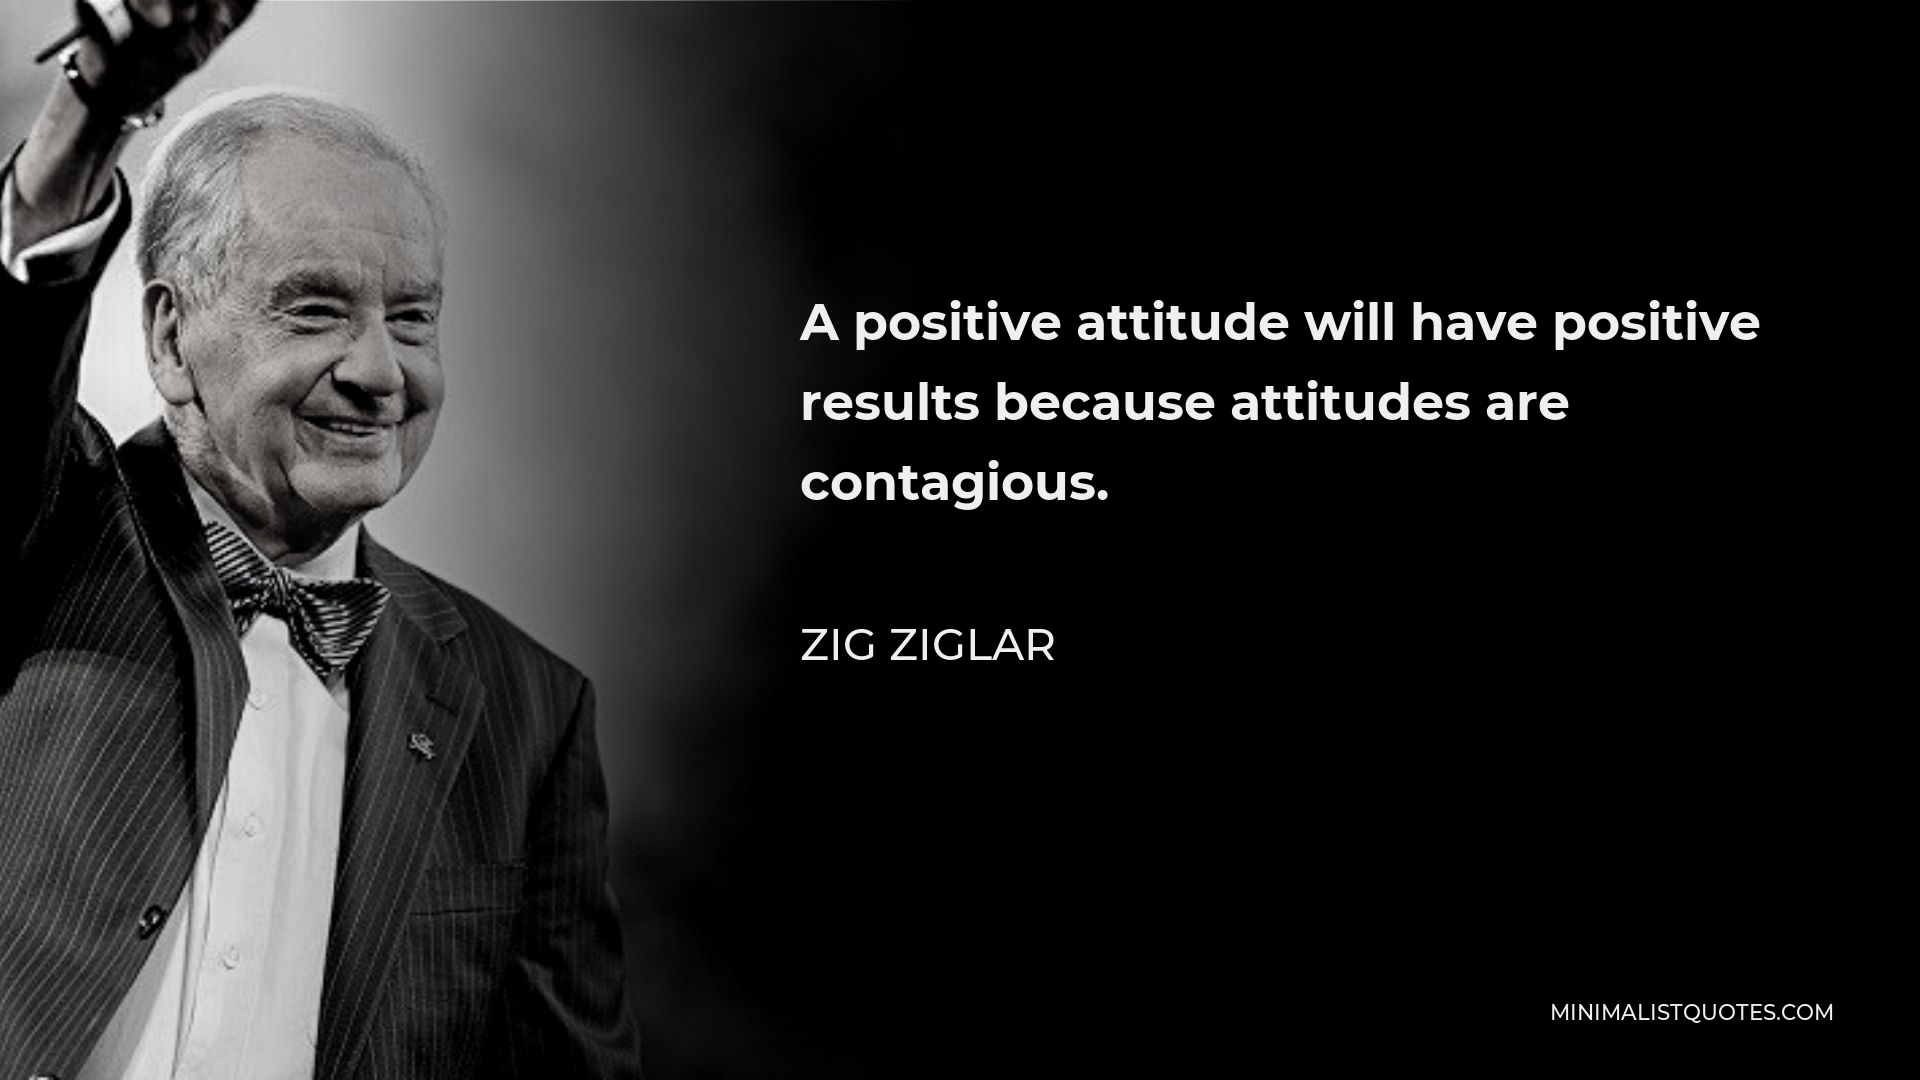 Zig Ziglar Quote - A positive attitude will have positive results because attitudes are contagious.